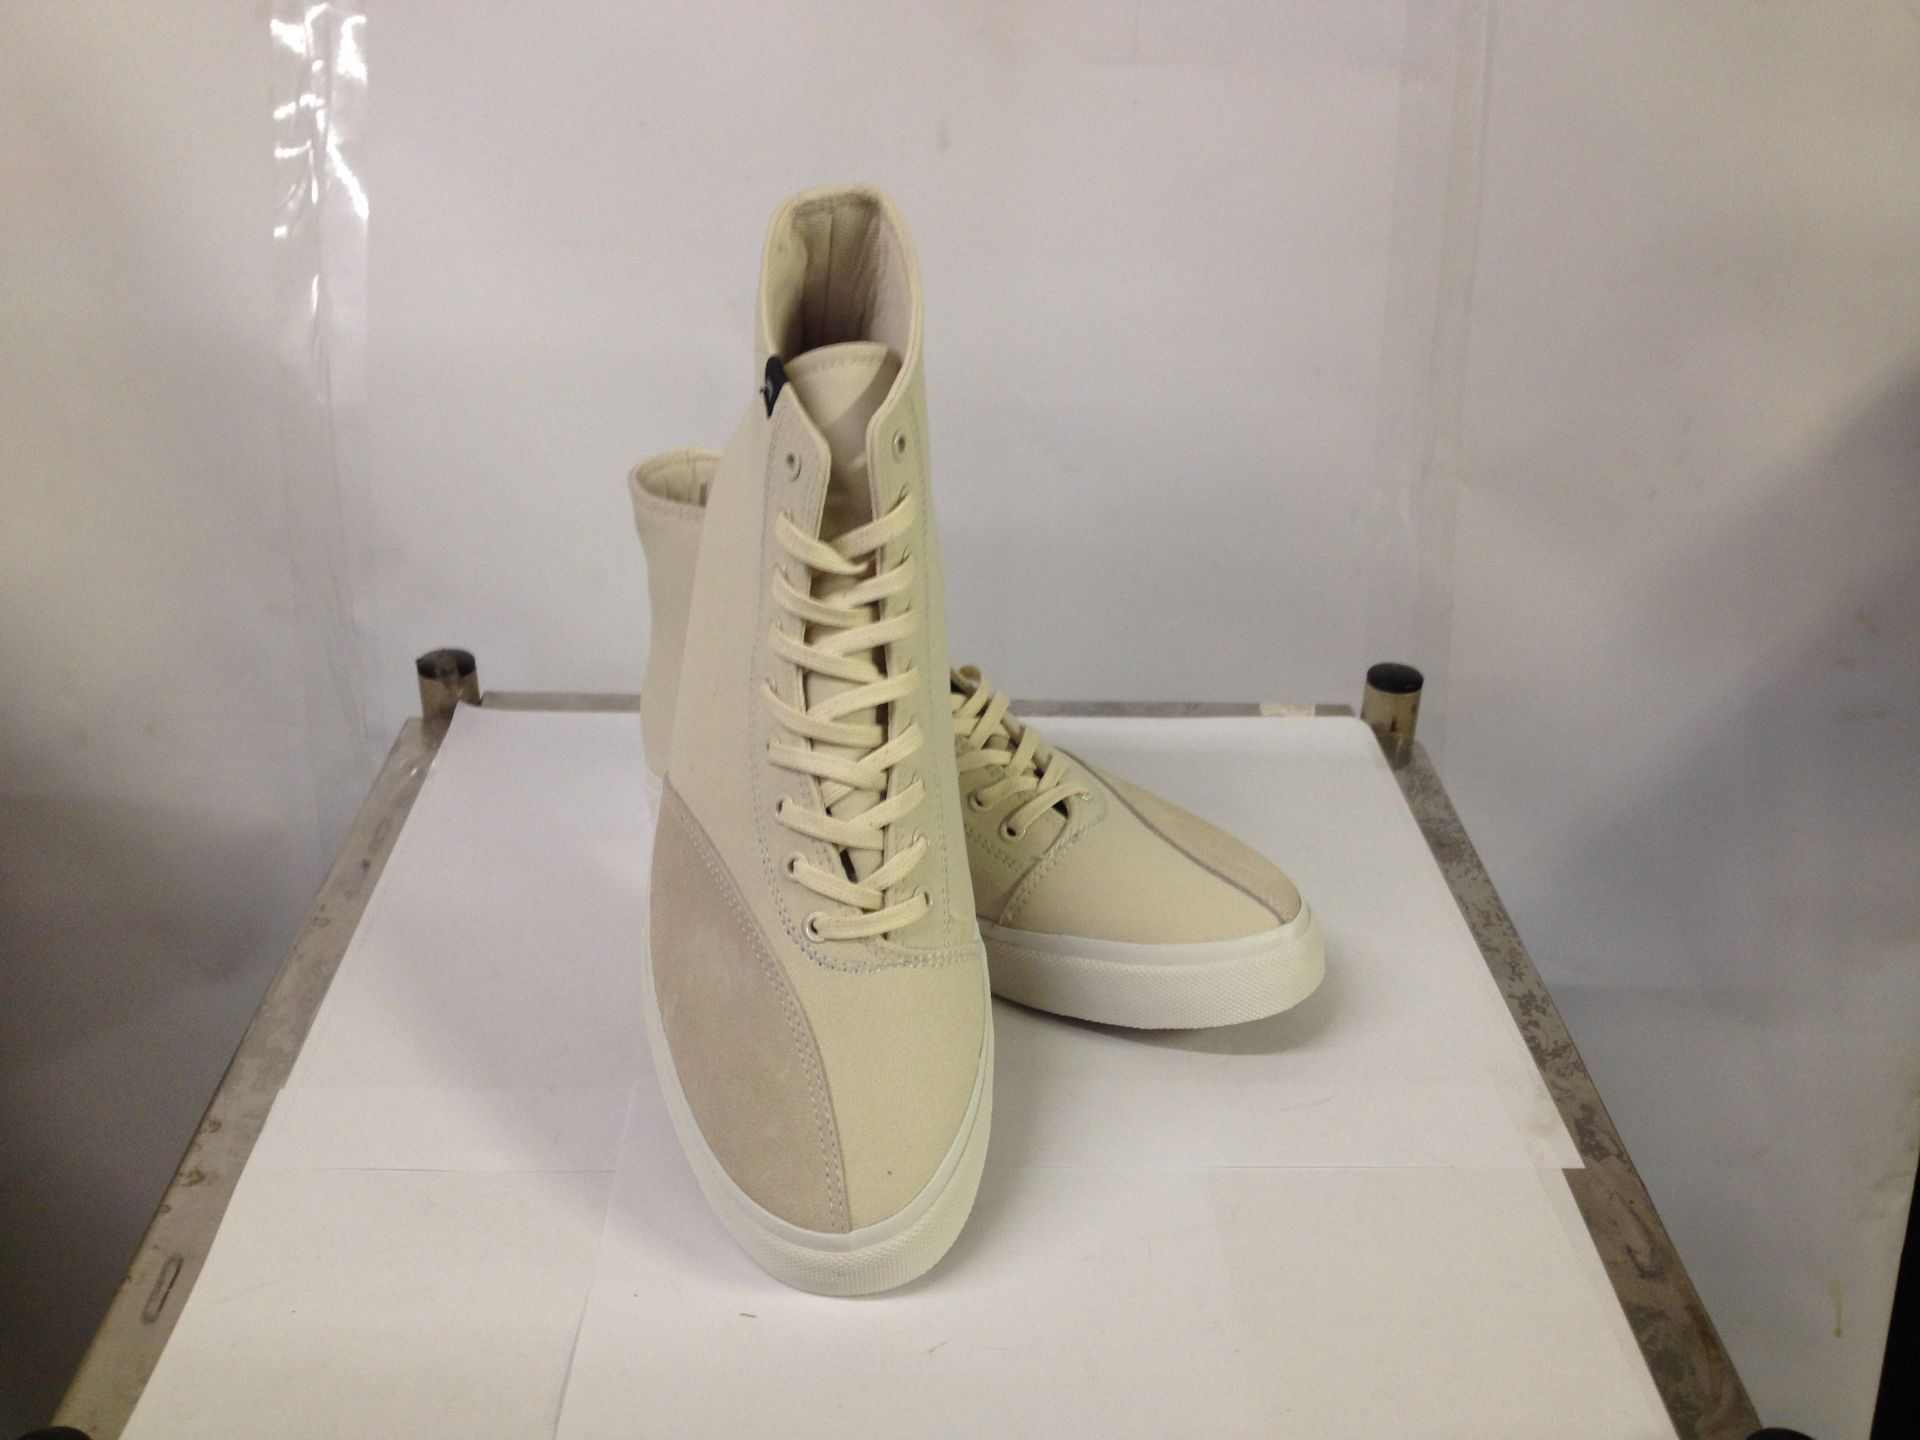 1 x Dodds High Top Sneakers | Colour: Winter White | UK Size: 9 | Unisex | RRP £ 55